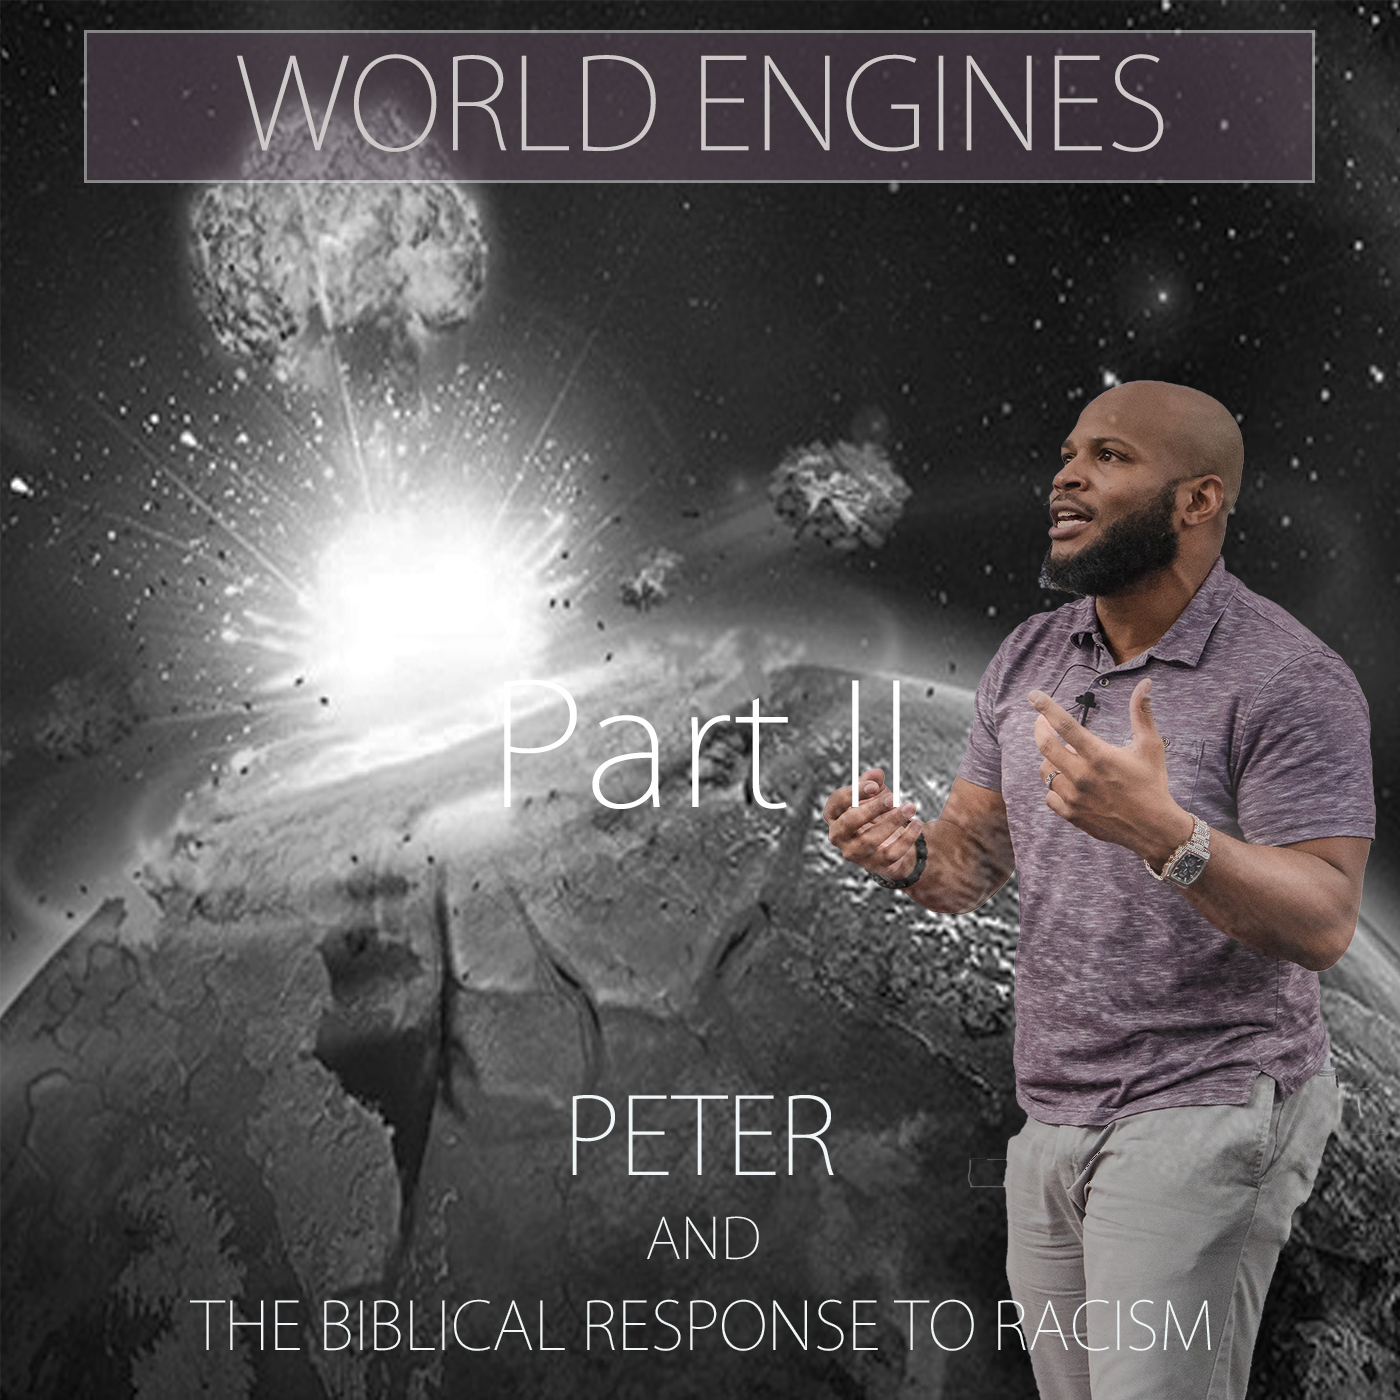 The World Engines - Peter and the biblical response to racism (part II)